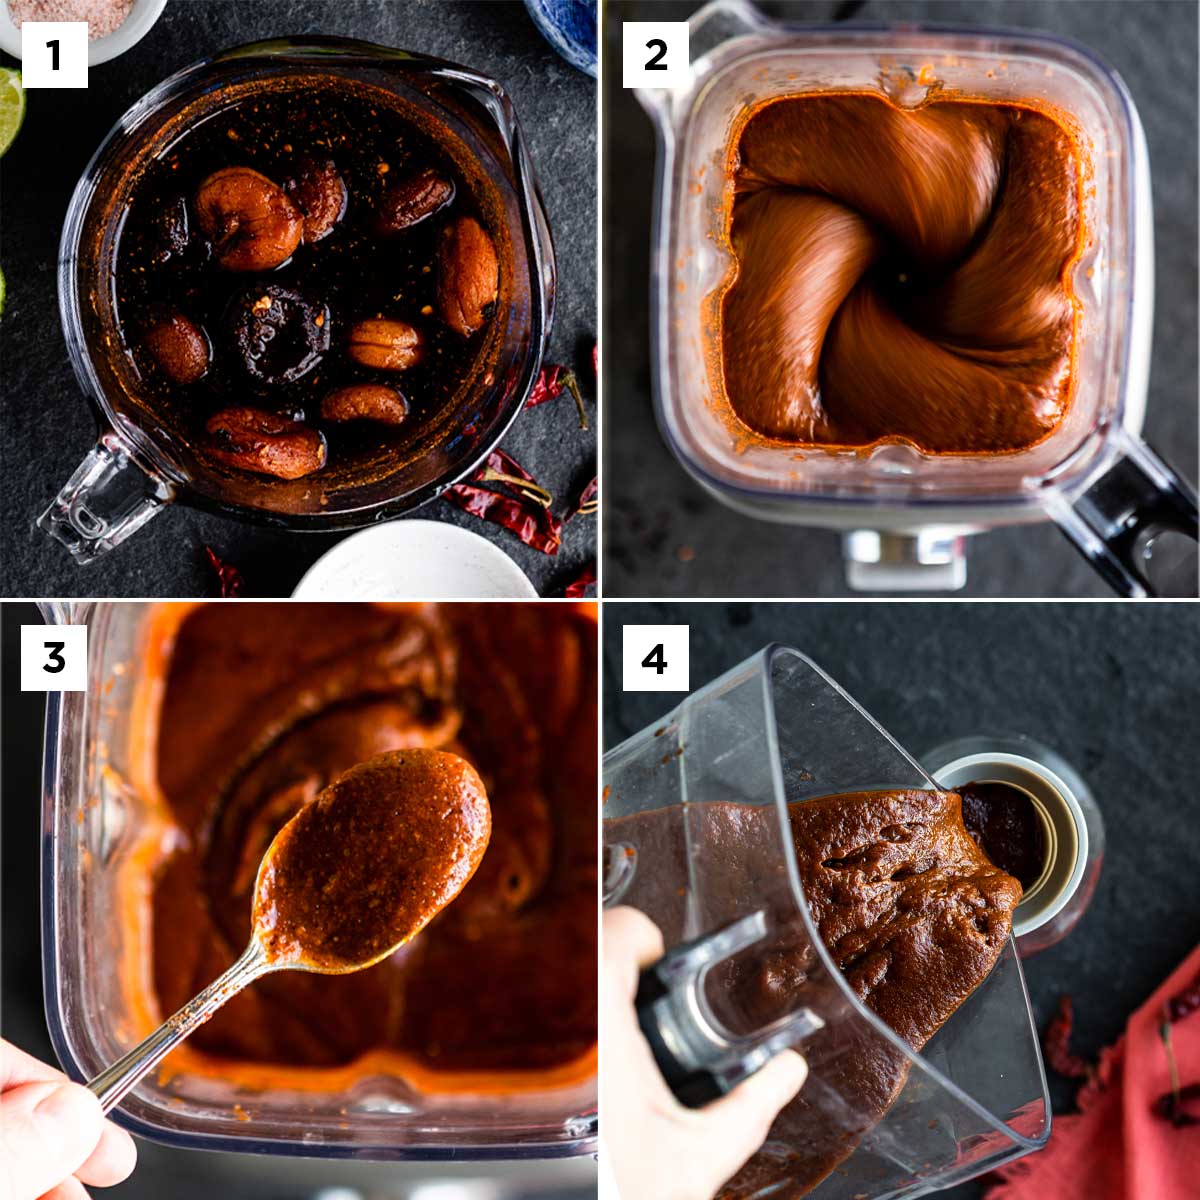 4 photos showing steps to chamoy including soaking ingredients, pureeing in blender until smooth and transferring to glass jar for storage